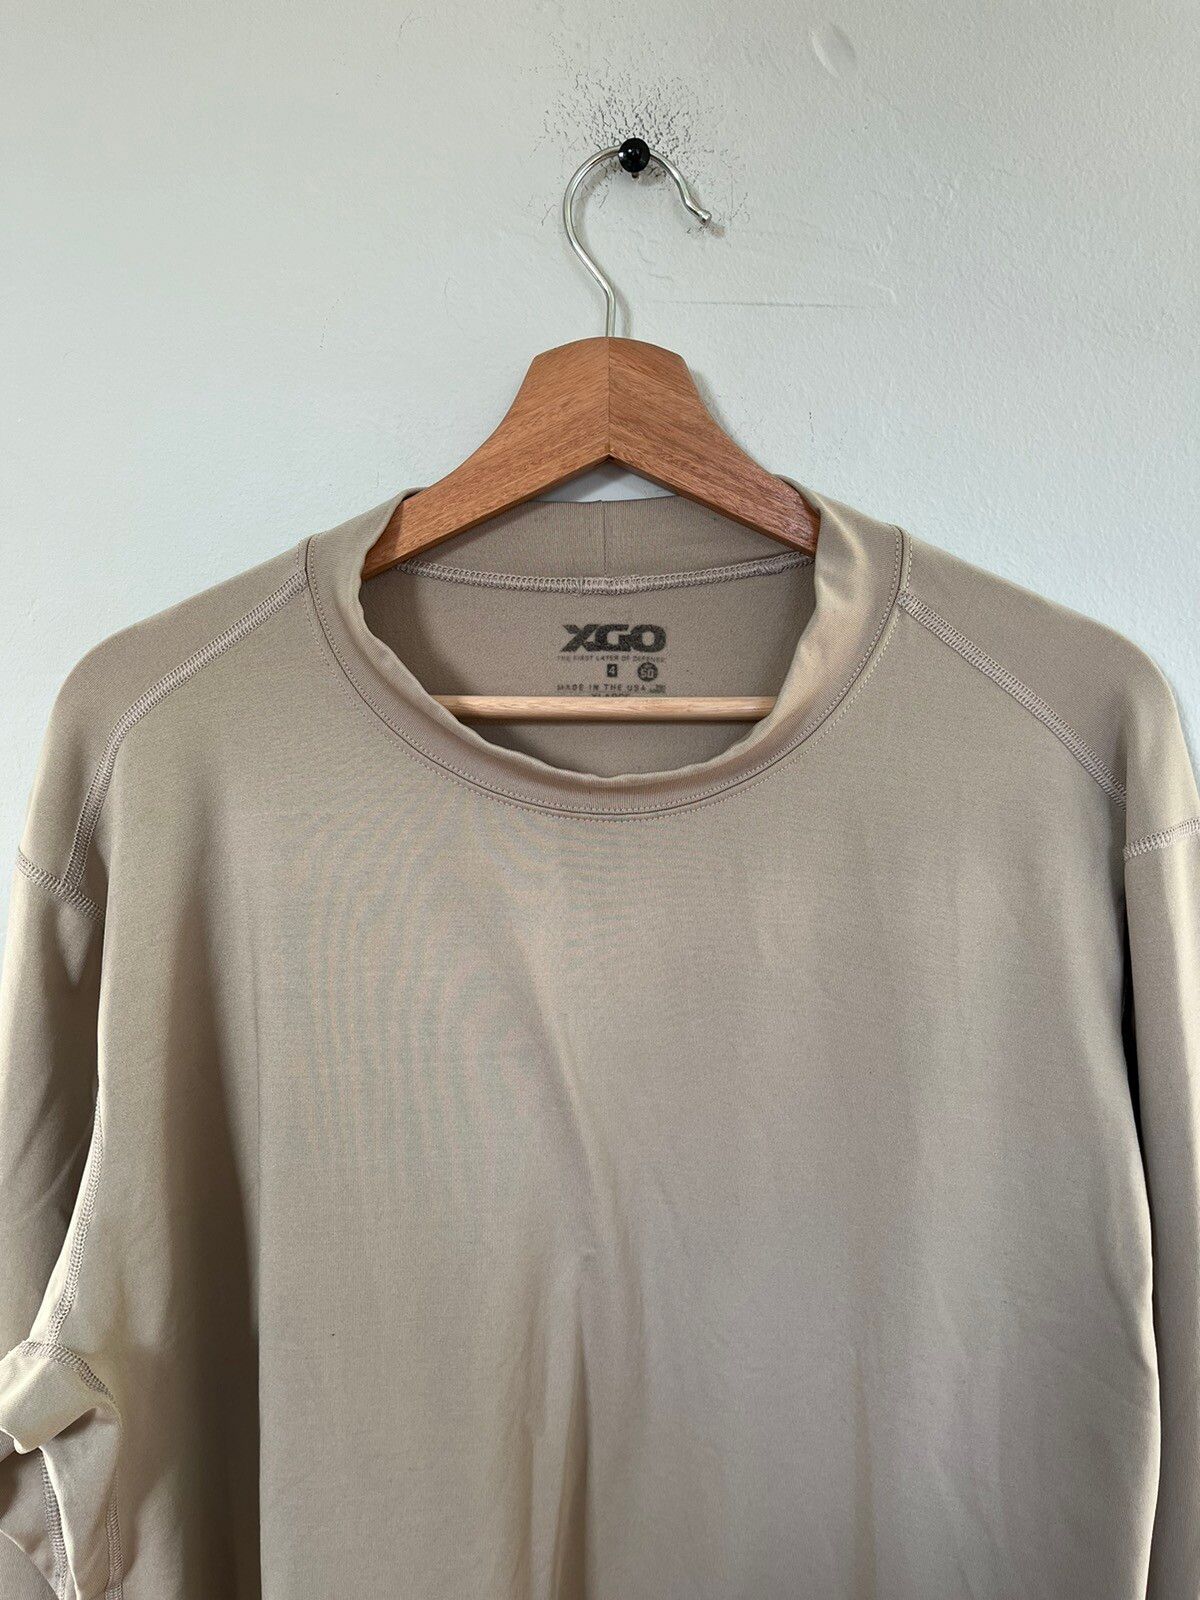 Military XGO Military Thermal Size US XL / EU 56 / 4 - 2 Preview